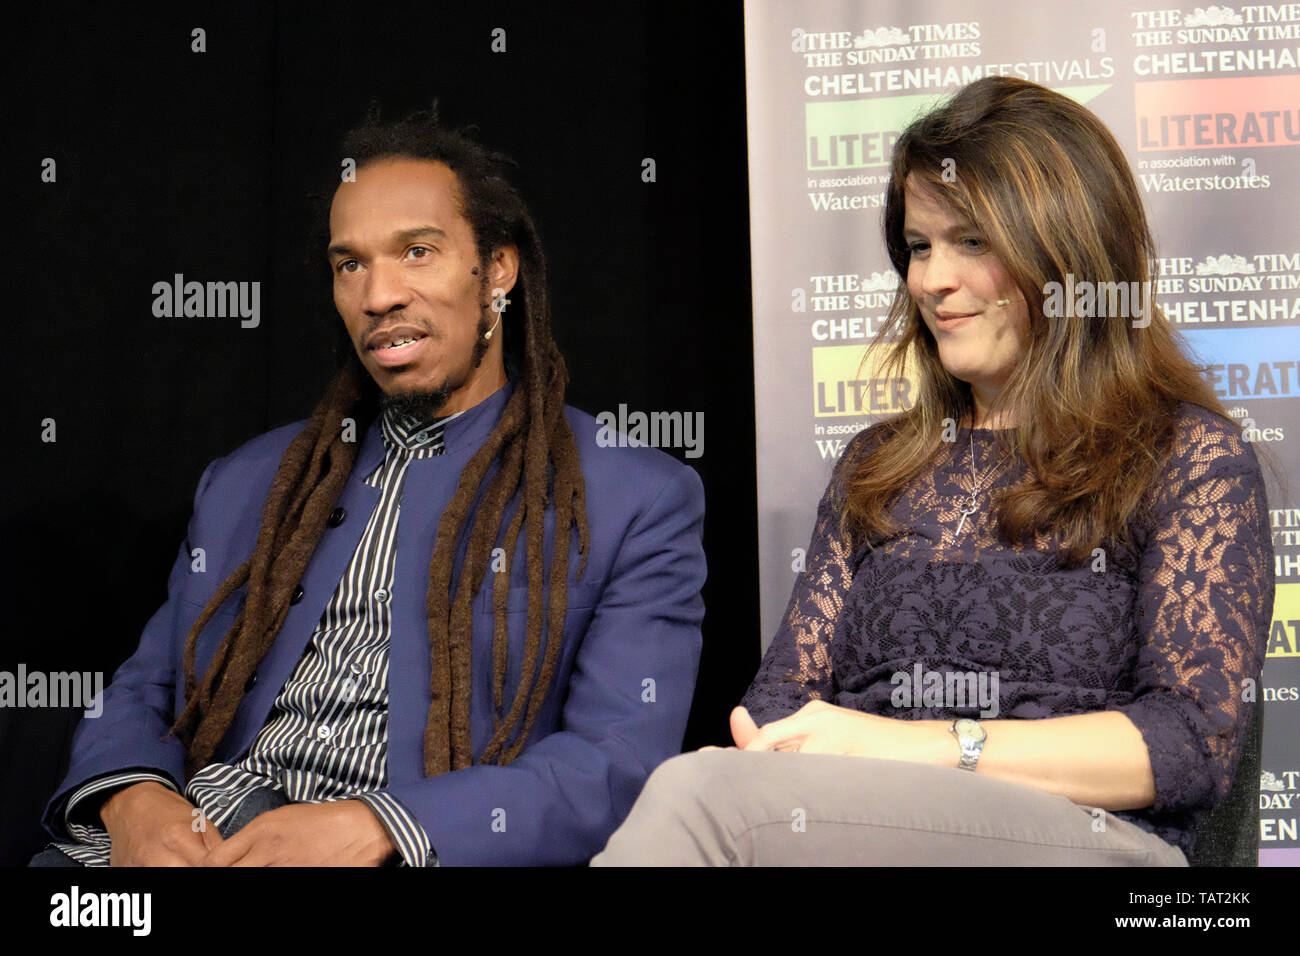 English Poet, novelist and playwright Benjamin Zephaniah with journalist and writer Catherine Bruton at the Cheltenham Literature Festival, October 11 Stock Photo